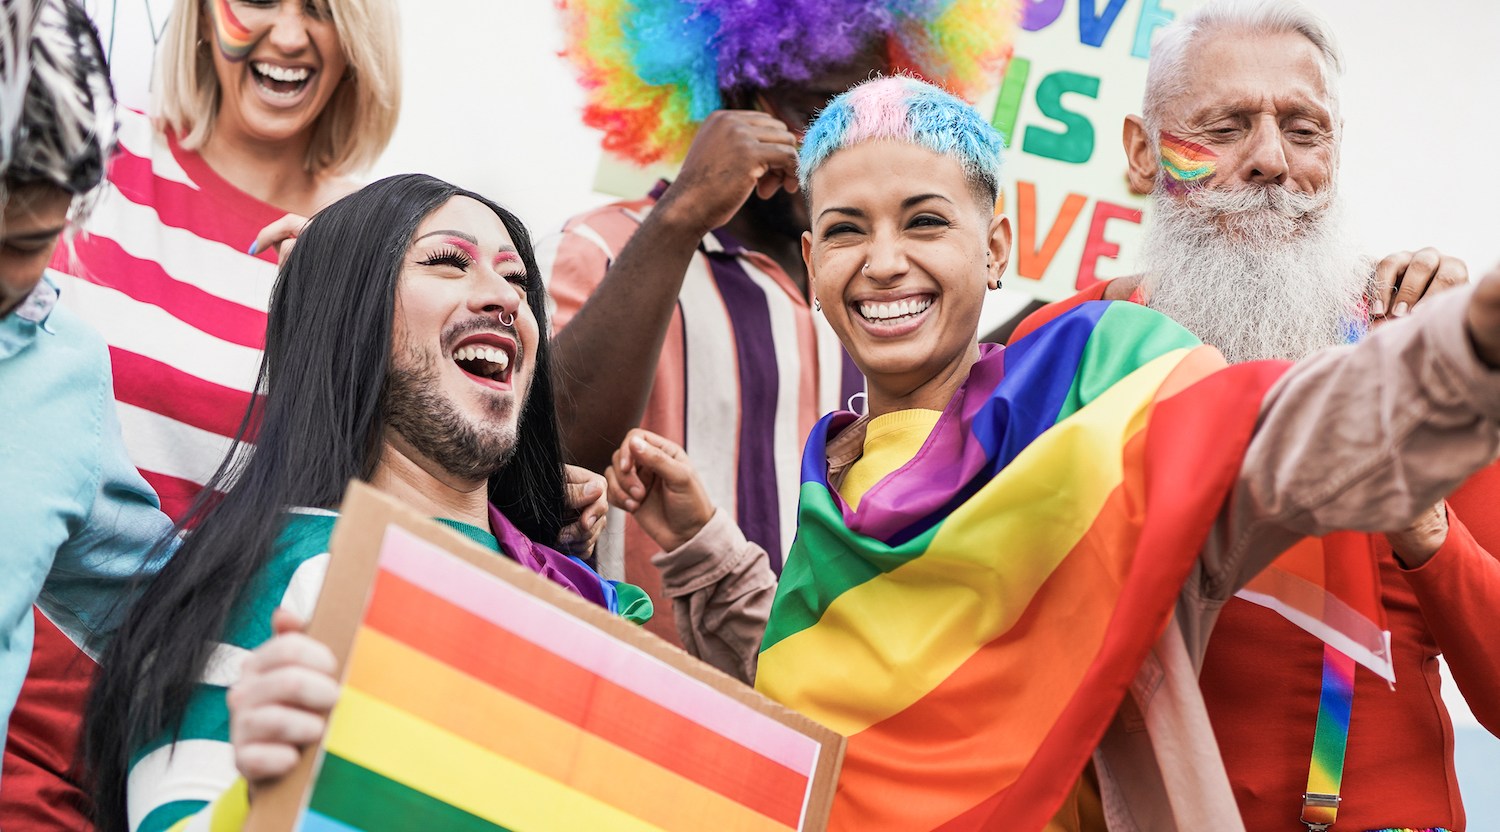 A group of LGBTQ people celebrating Pride waving rainbow flags